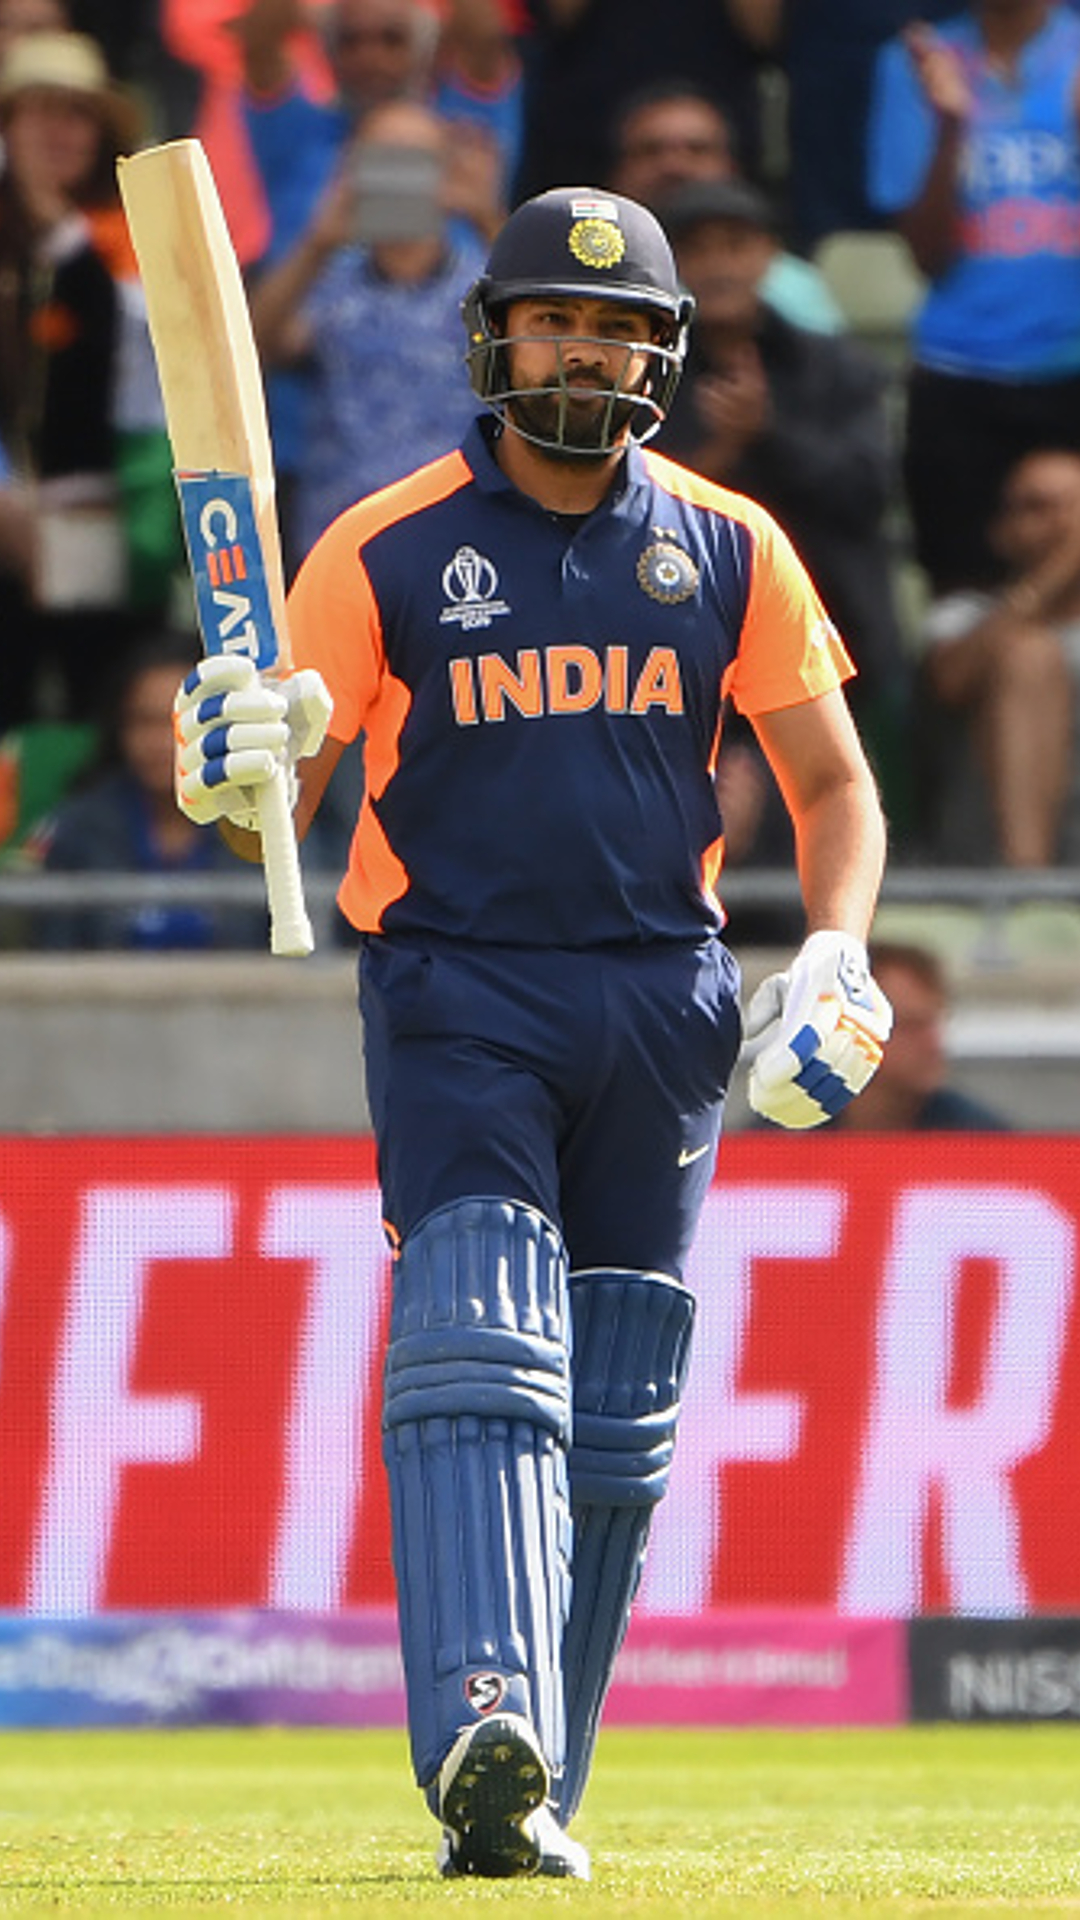 Rohit Sharma's last 10 ODI hundreds featuring 159 vs West Indies